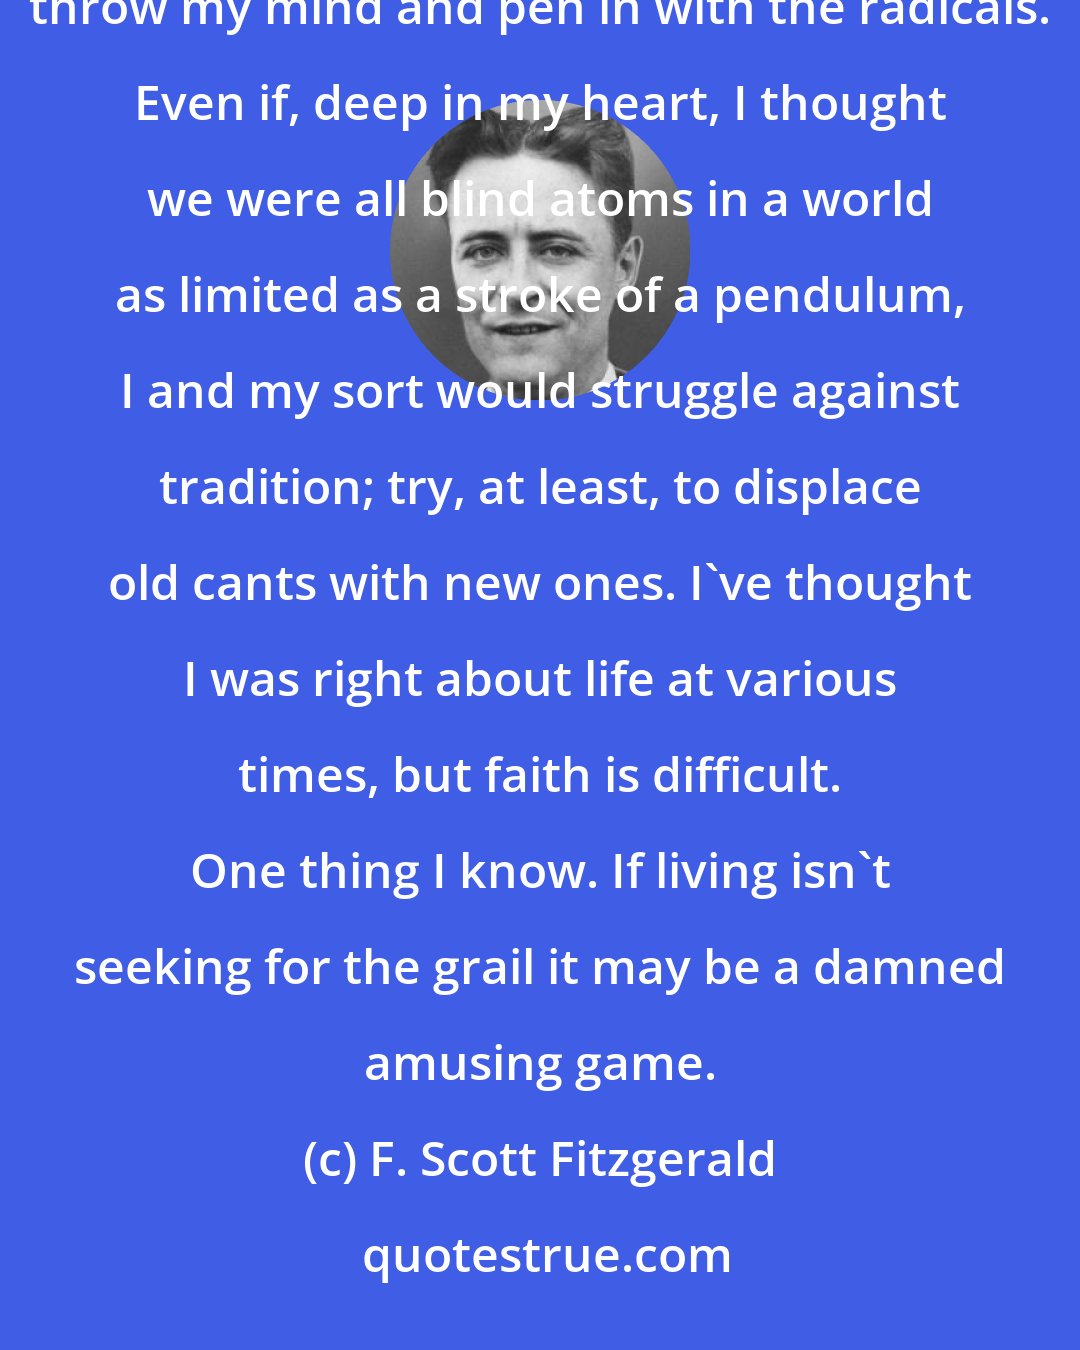 F. Scott Fitzgerald: I simply state that I'm a product of a versatile mind in a restless generation - with every reason to throw my mind and pen in with the radicals. Even if, deep in my heart, I thought we were all blind atoms in a world as limited as a stroke of a pendulum, I and my sort would struggle against tradition; try, at least, to displace old cants with new ones. I've thought I was right about life at various times, but faith is difficult. One thing I know. If living isn't seeking for the grail it may be a damned amusing game.